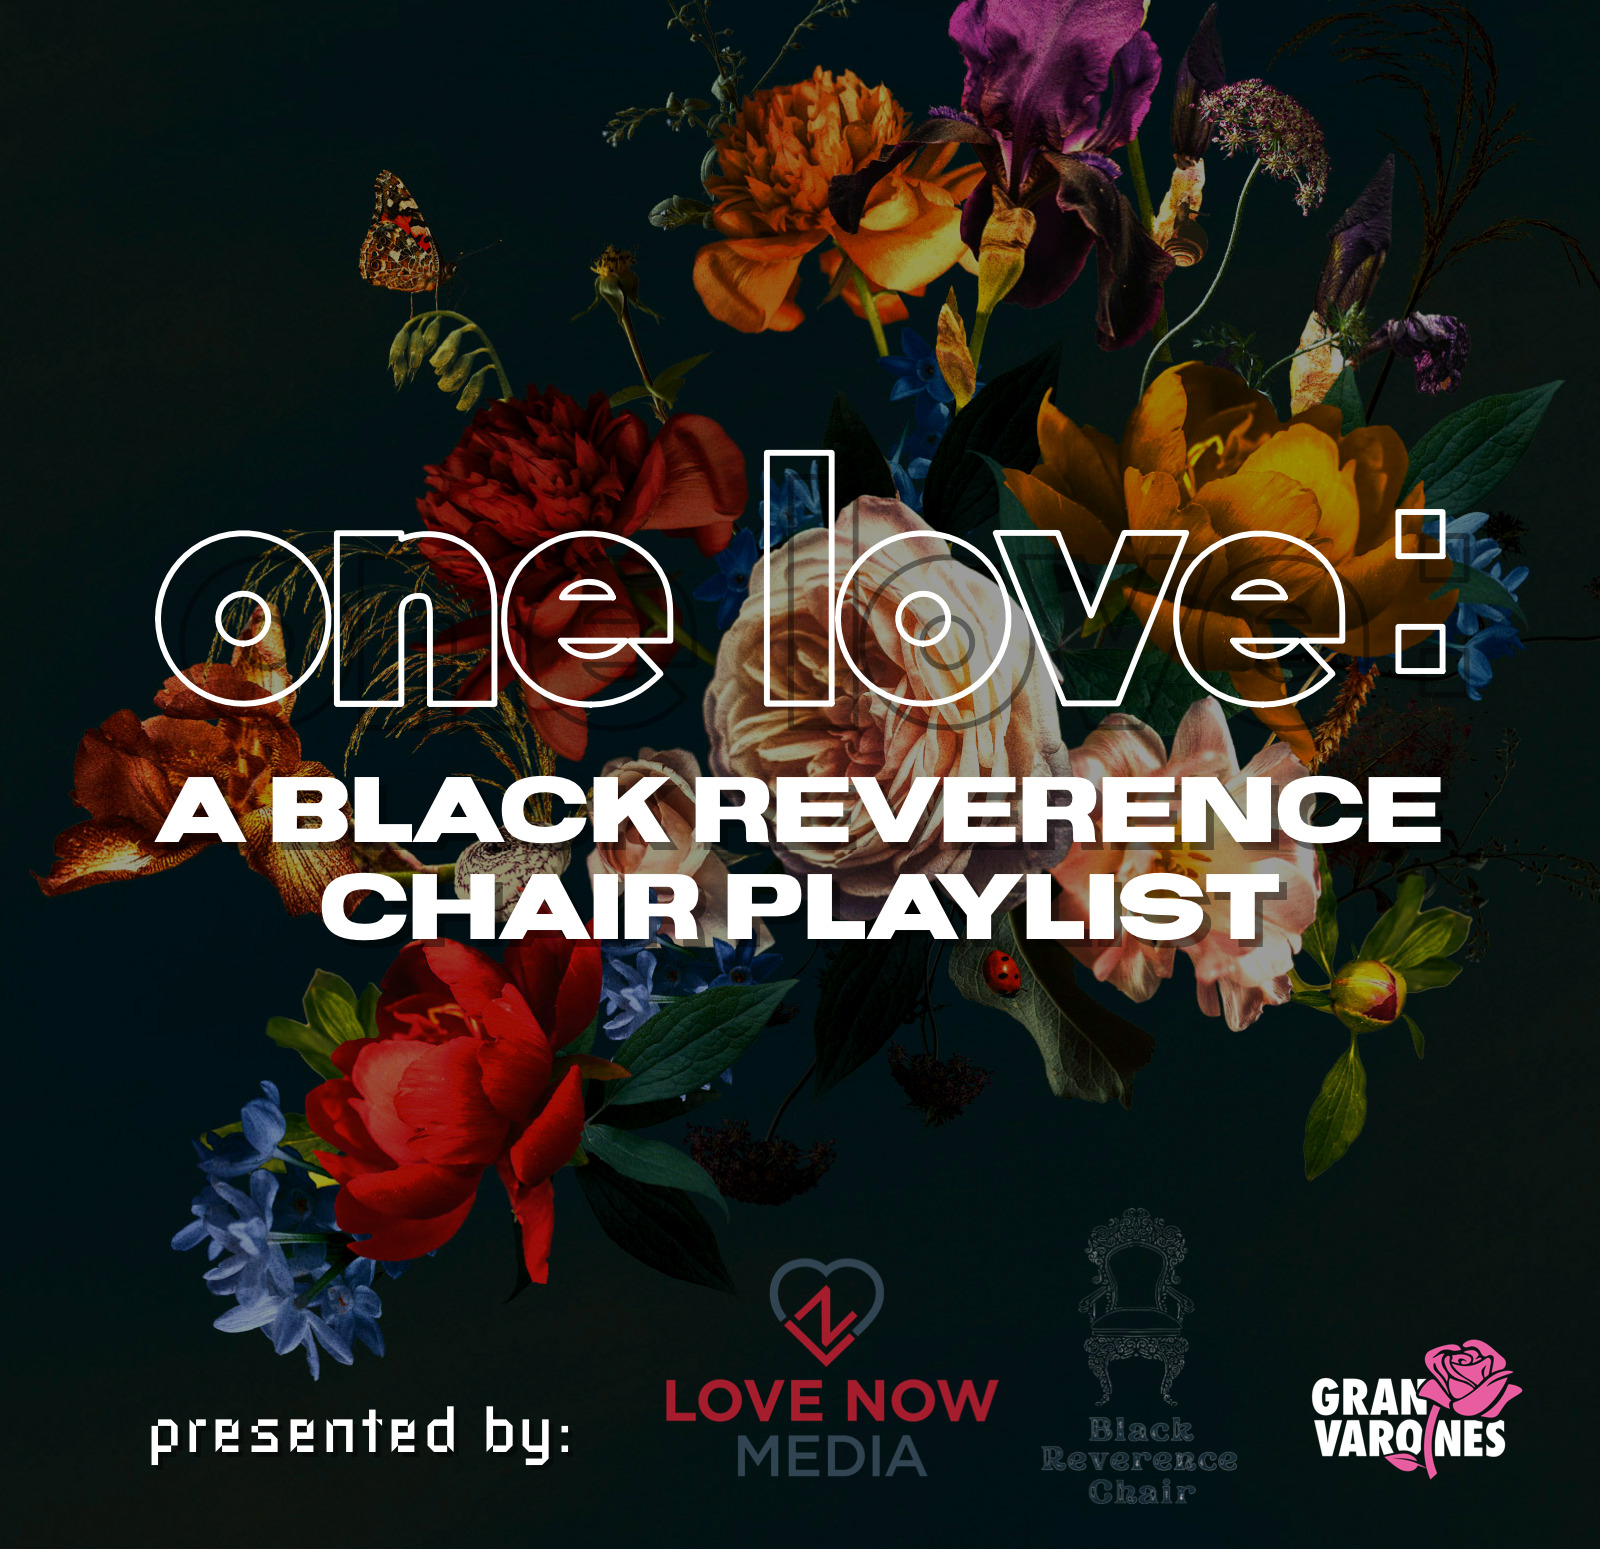 One Love: A Black Reverence Chair Playlist